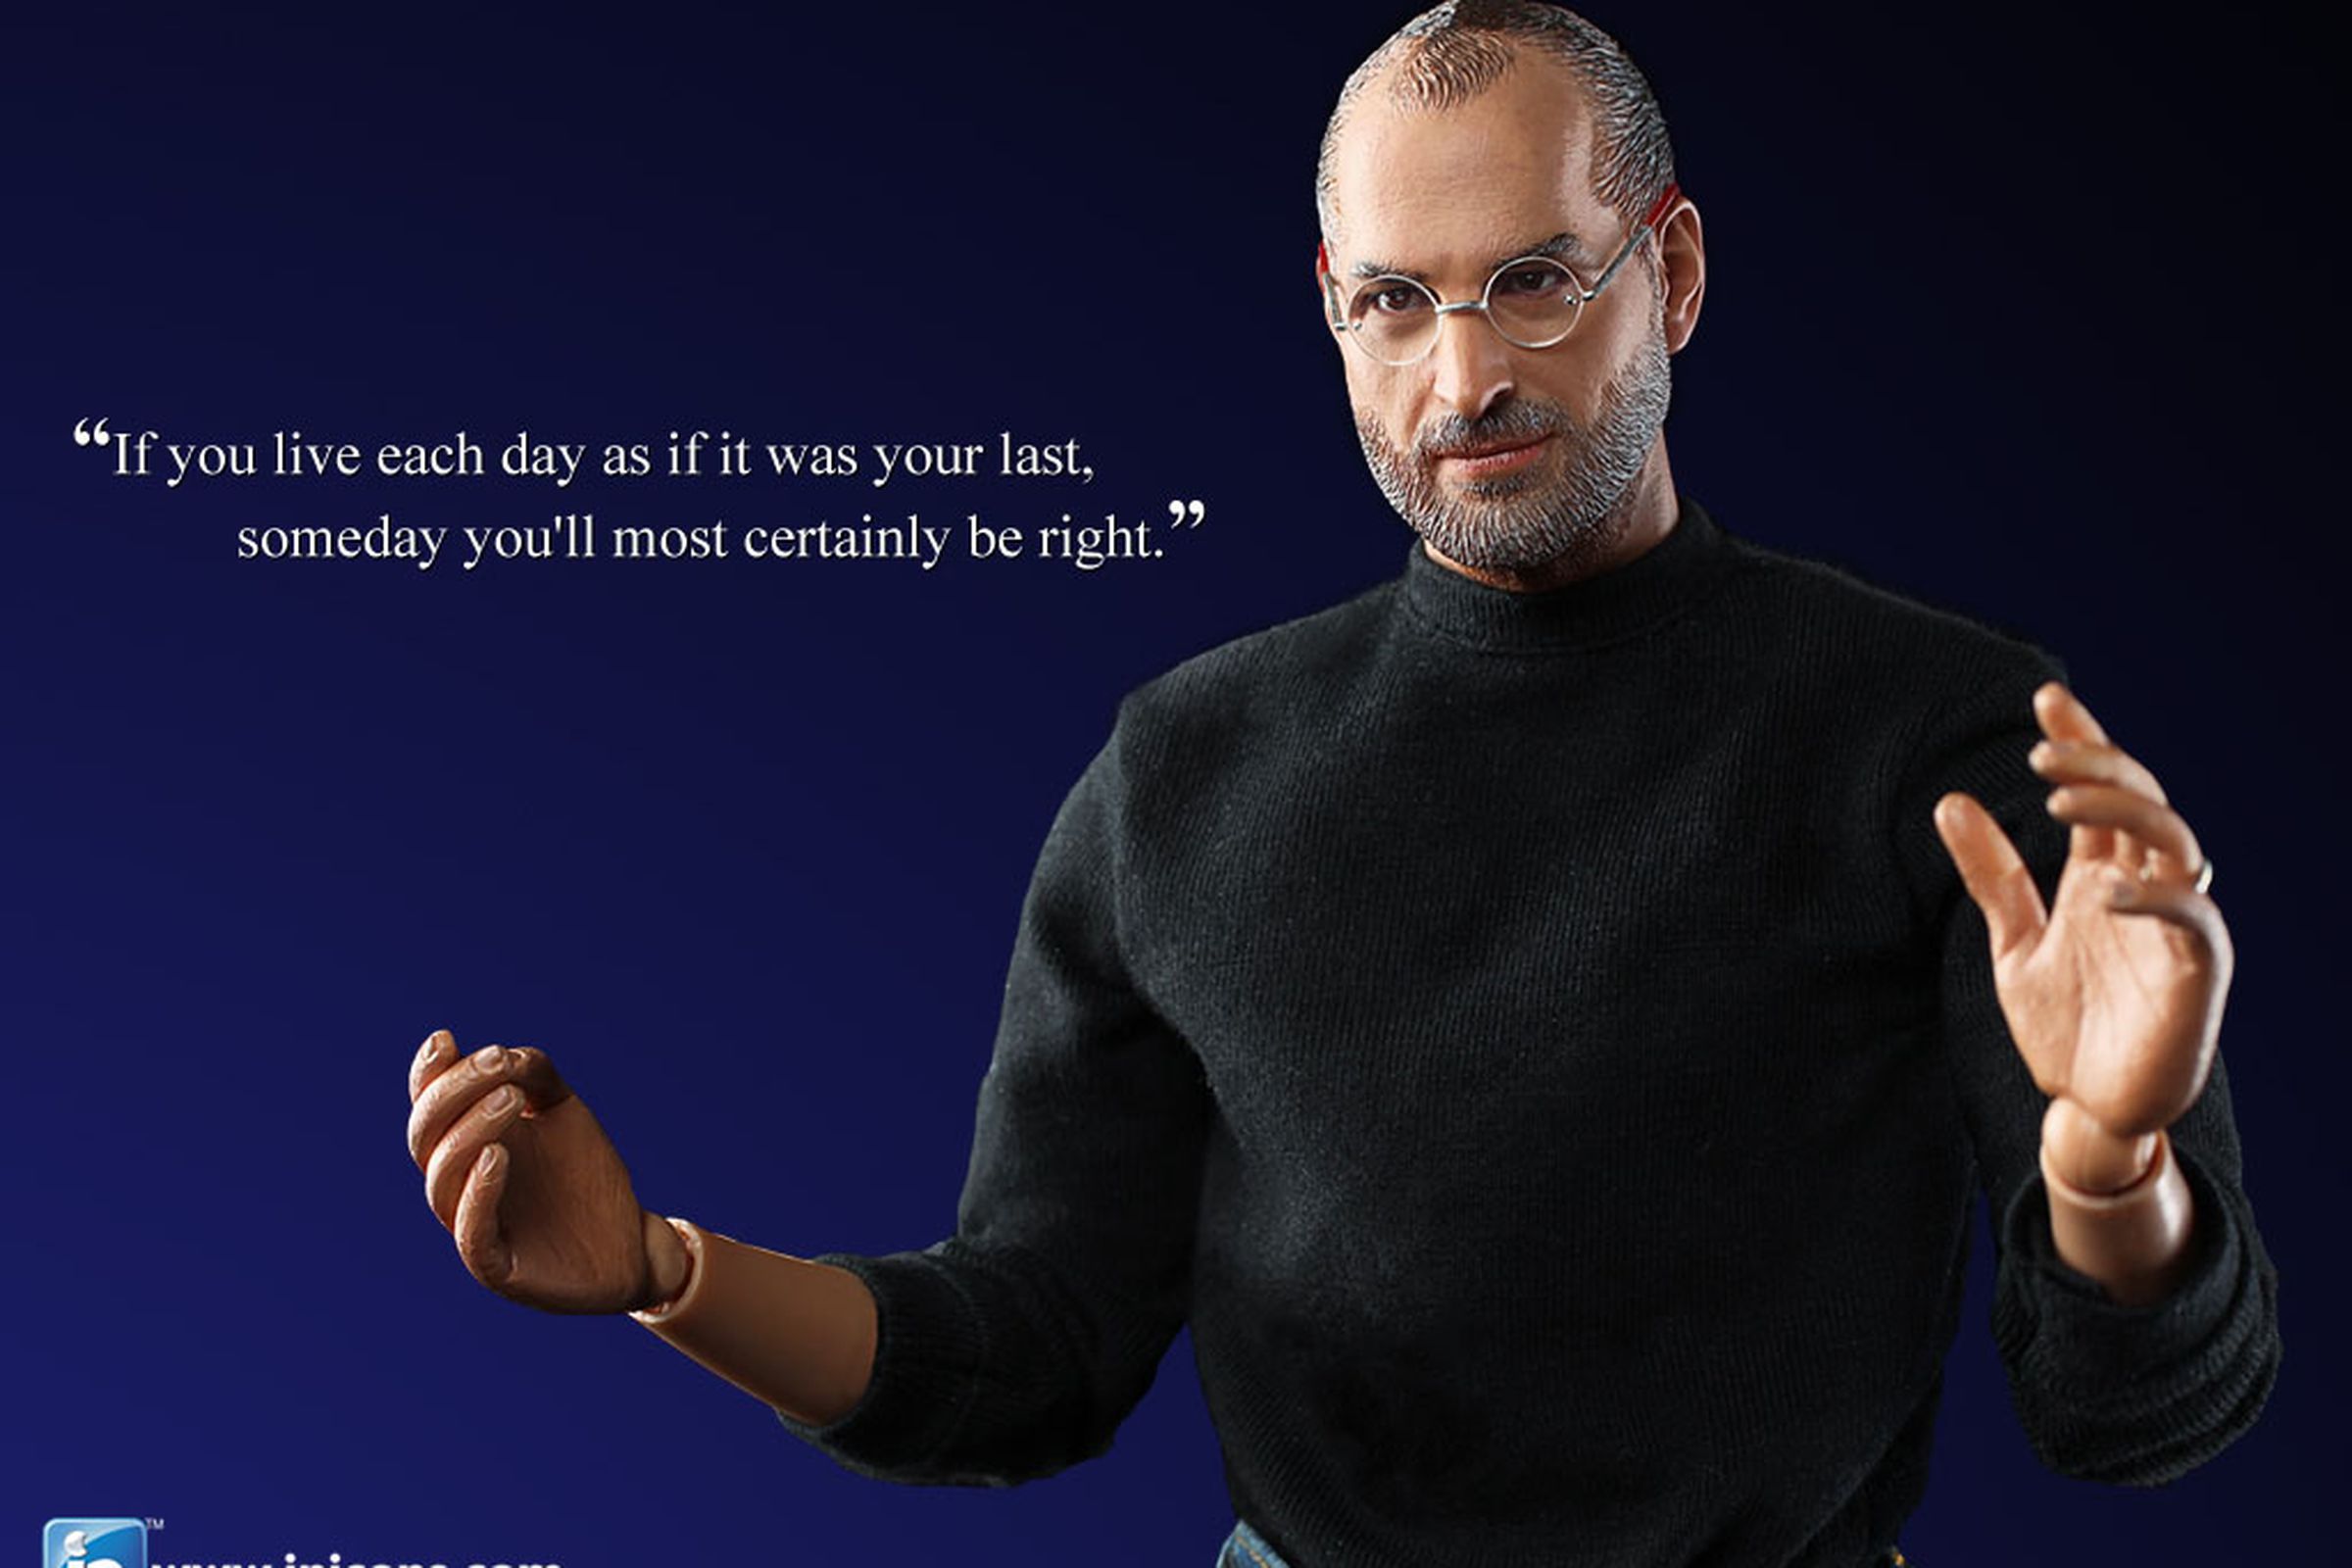 Steve Jobs in icons action figure